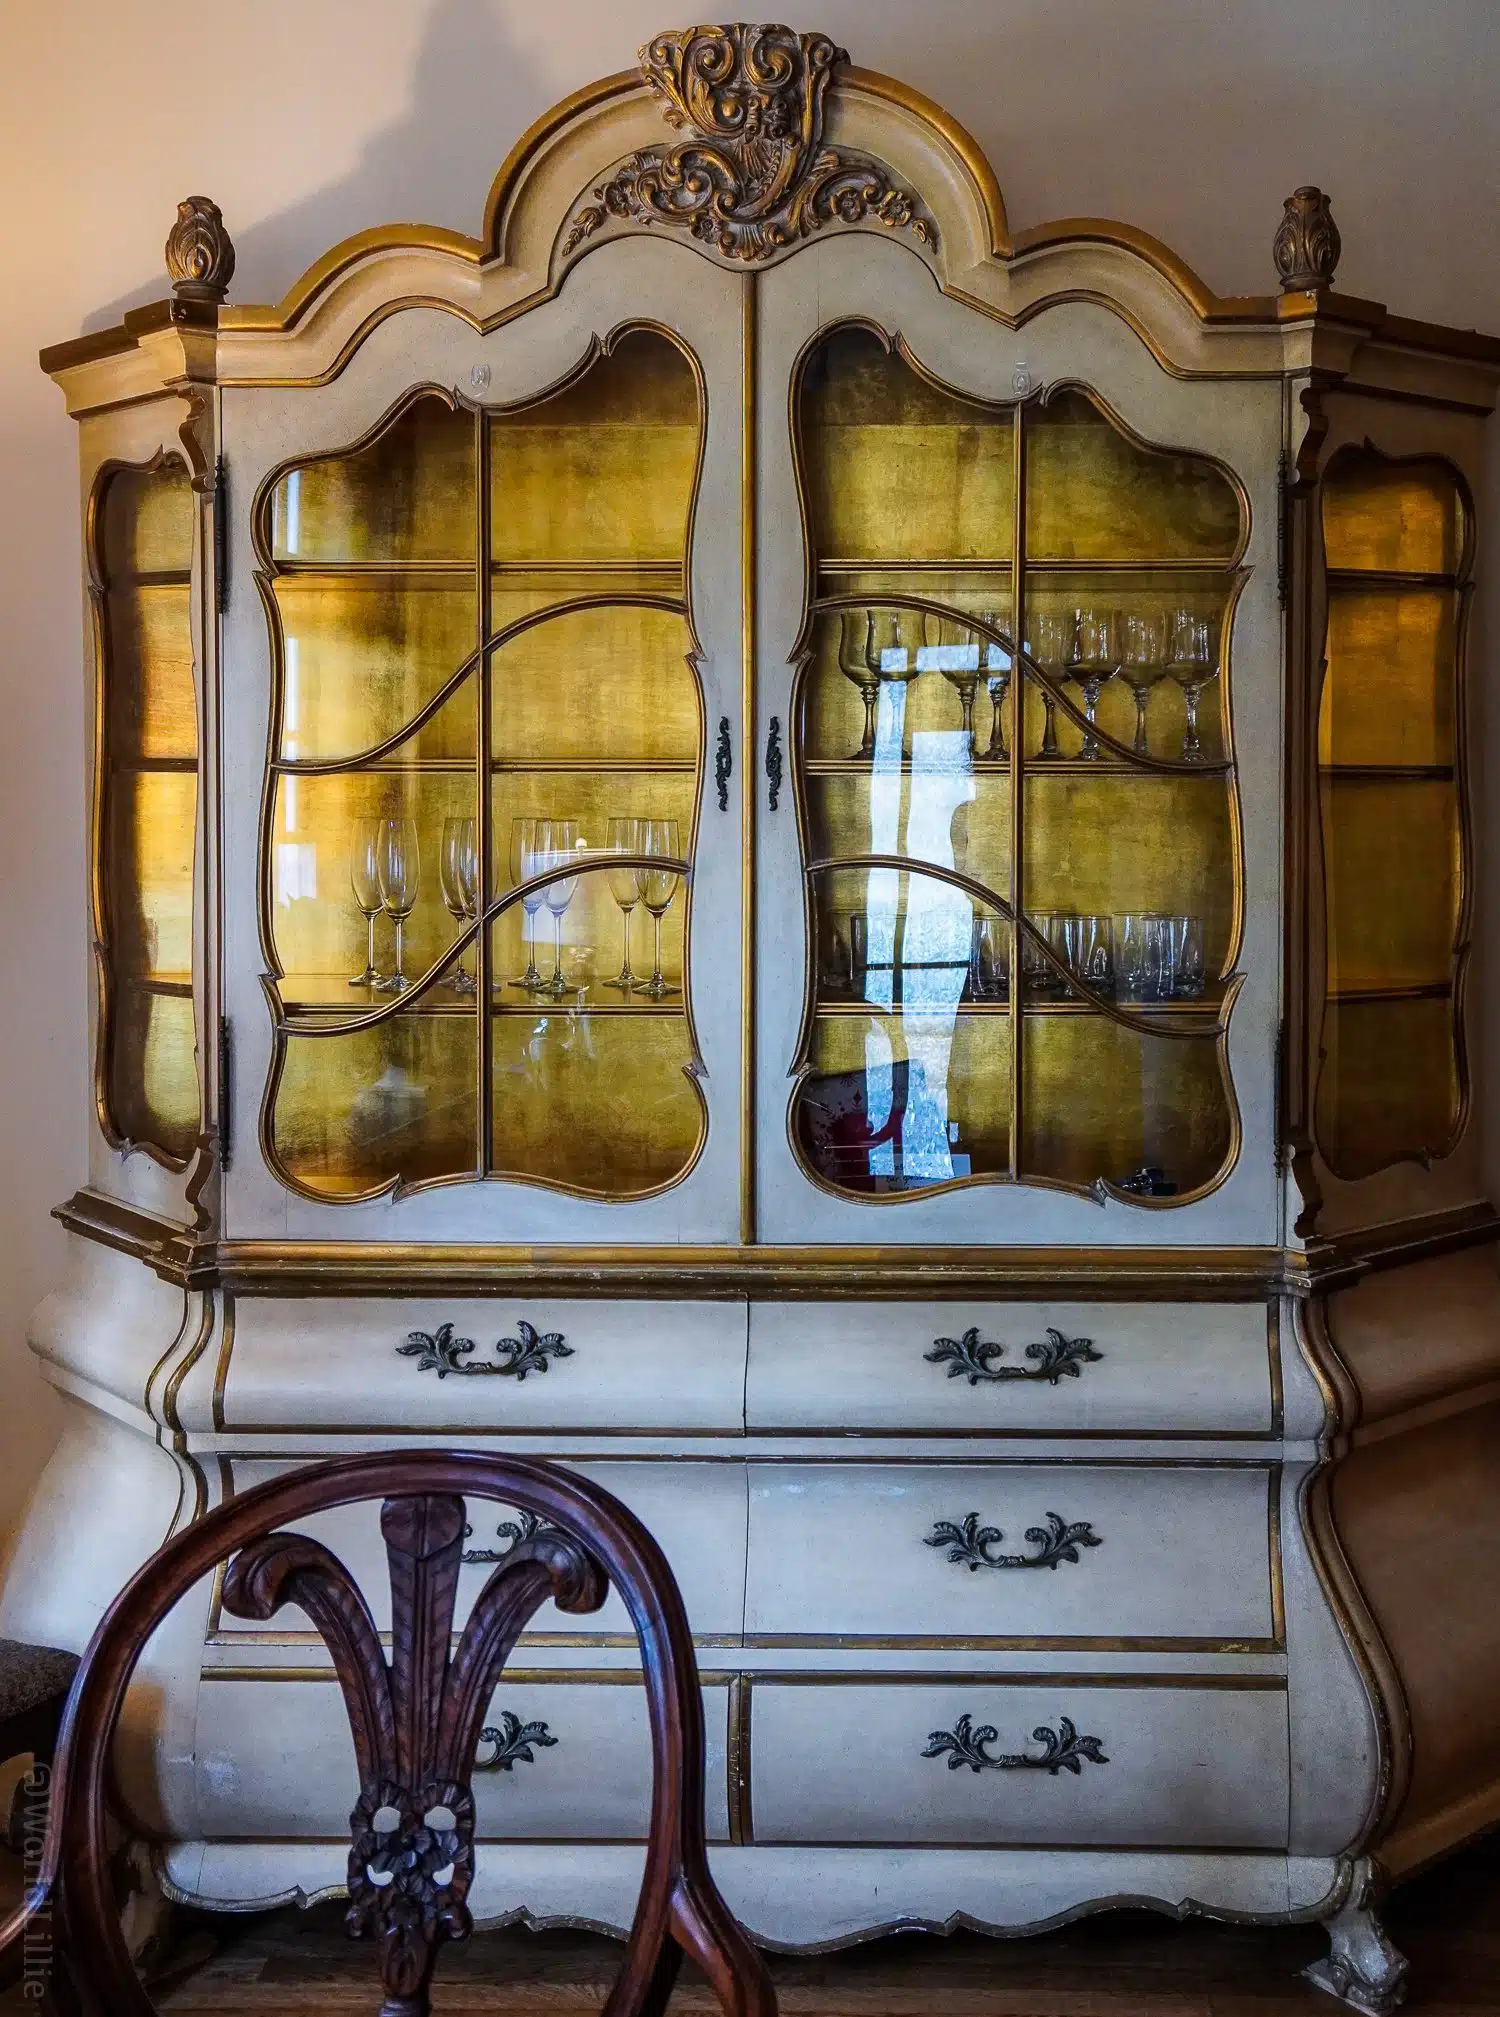 A magical looking piece of furniture in the central sitting room.